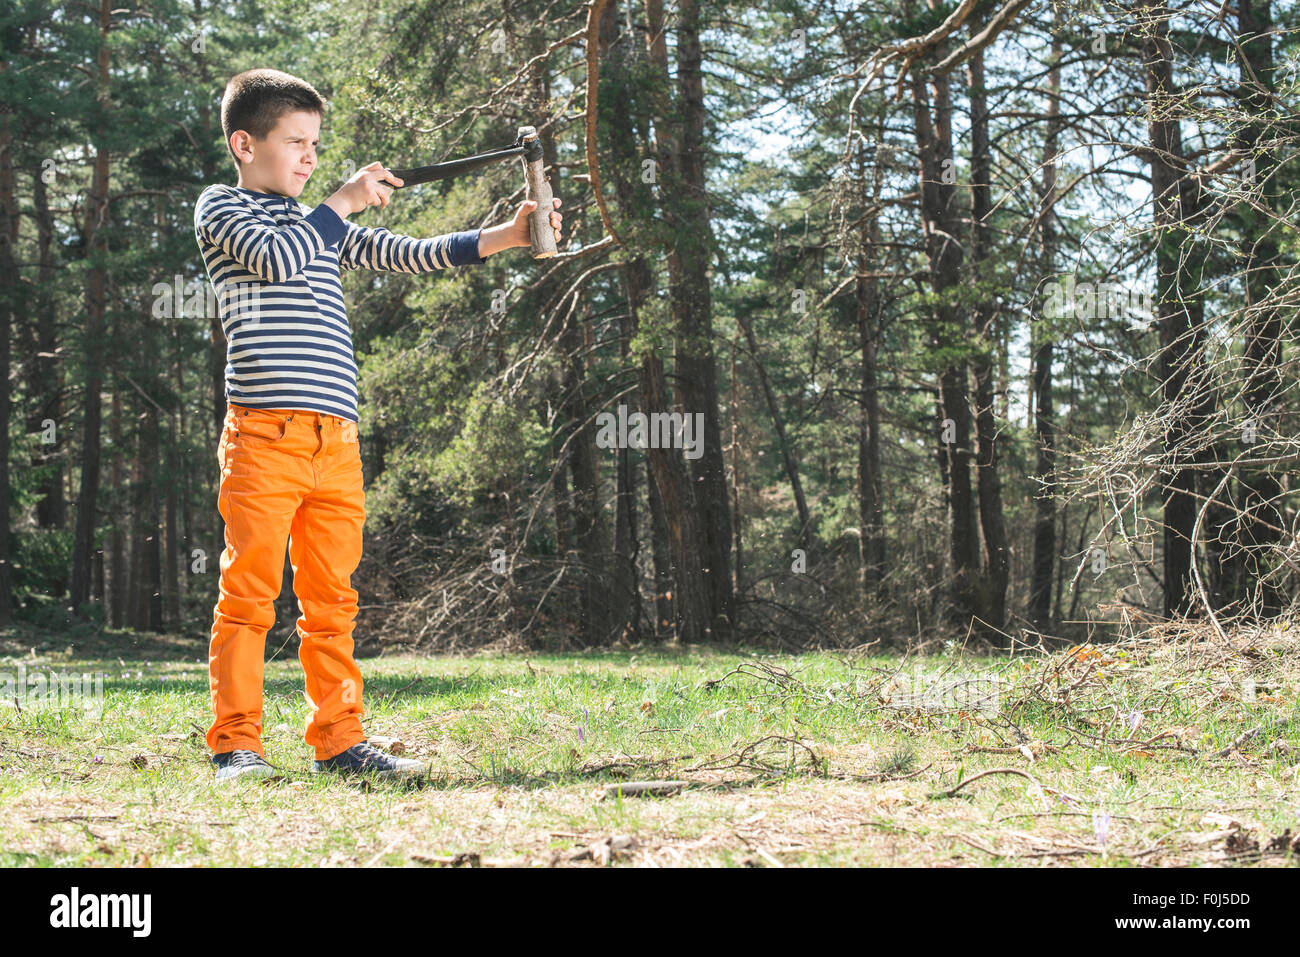 Child play with sling toy in the forest. Stock Photo